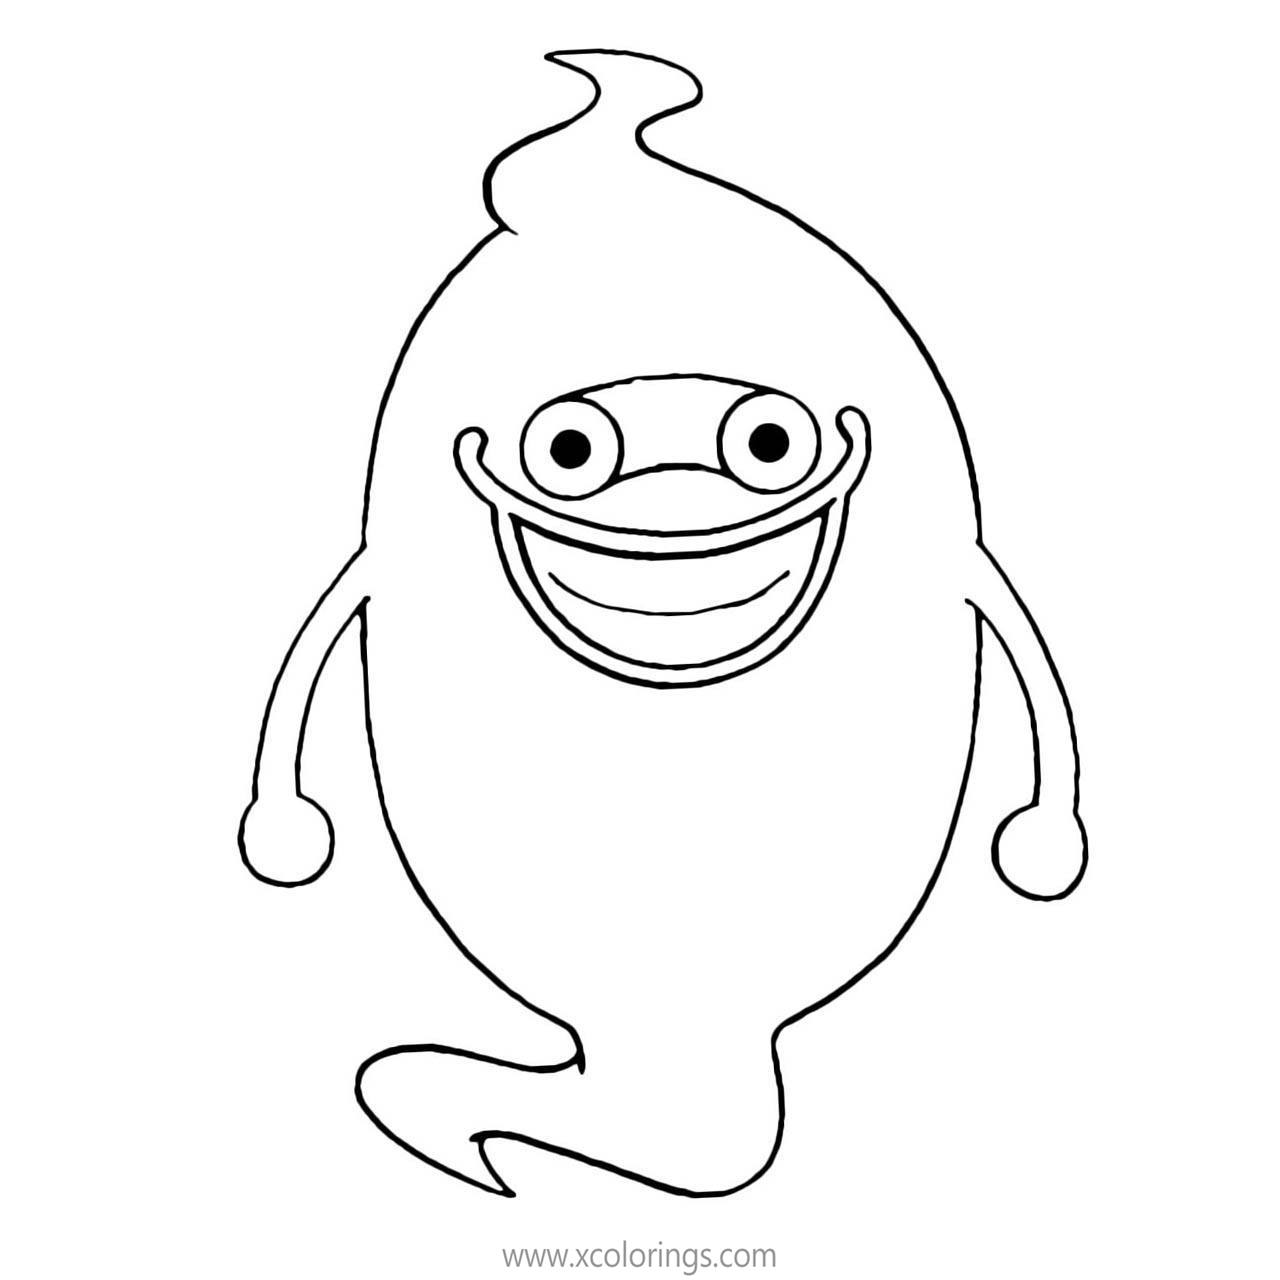 Free Yo-Kai Watch Coloring Pages Whisper with Smile printable